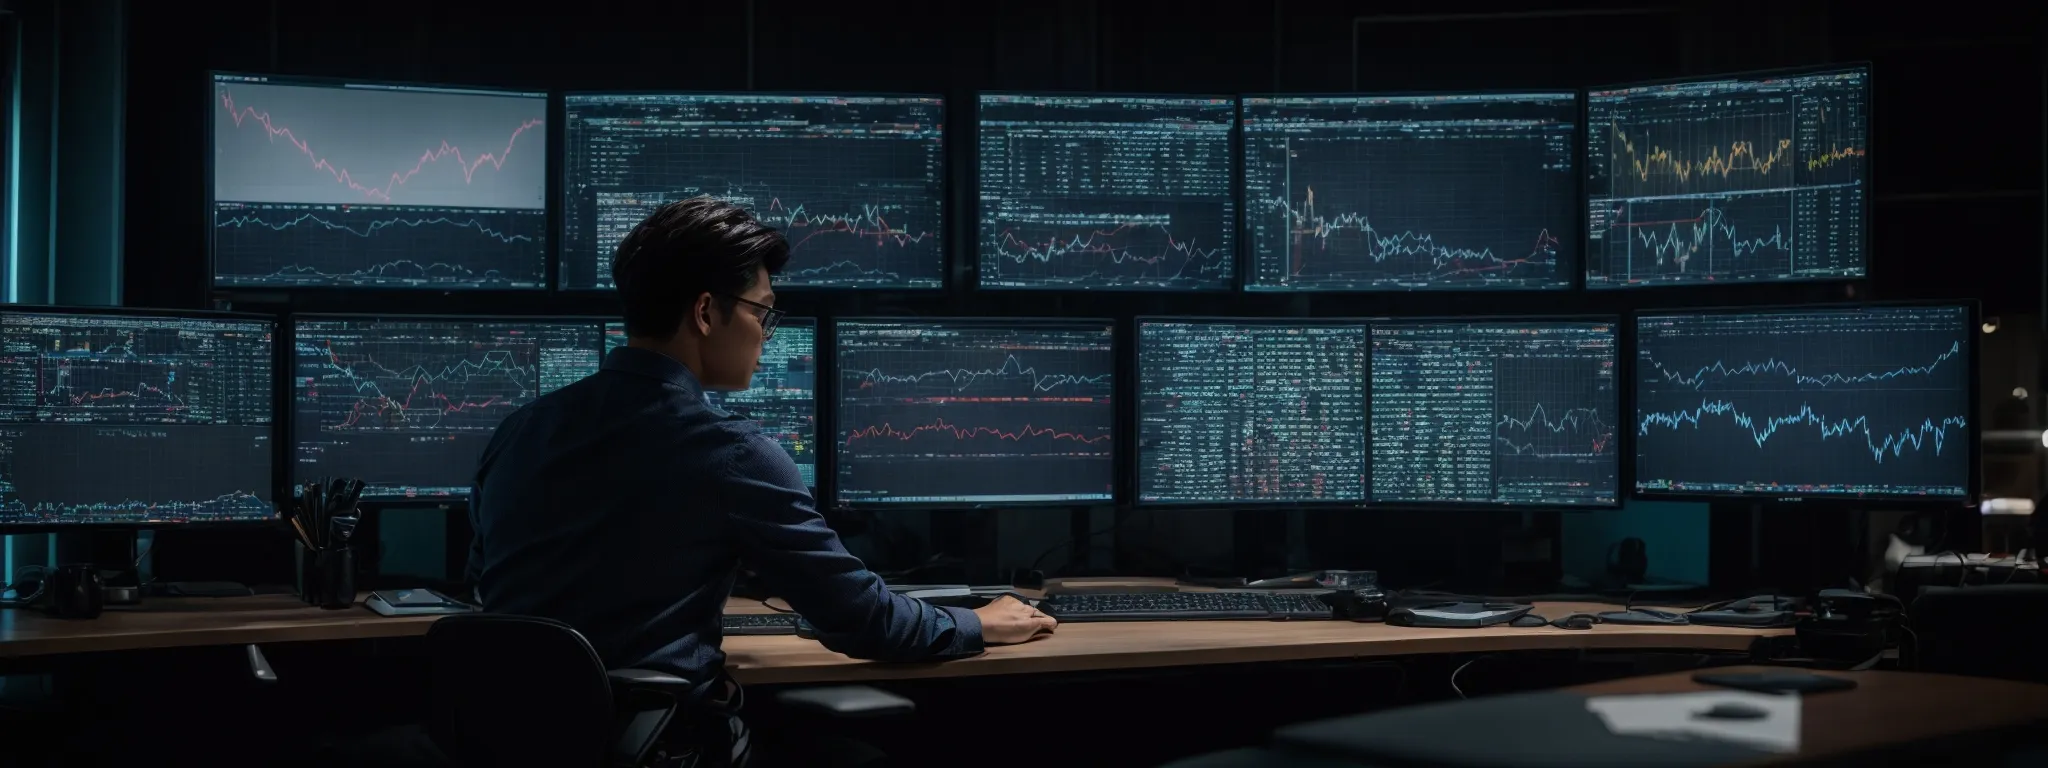 a person sitting at a modern desk amidst multiple high-resolution computer monitors displaying various analytical graphs and site metrics, symbolizing a high-tech seo command center.